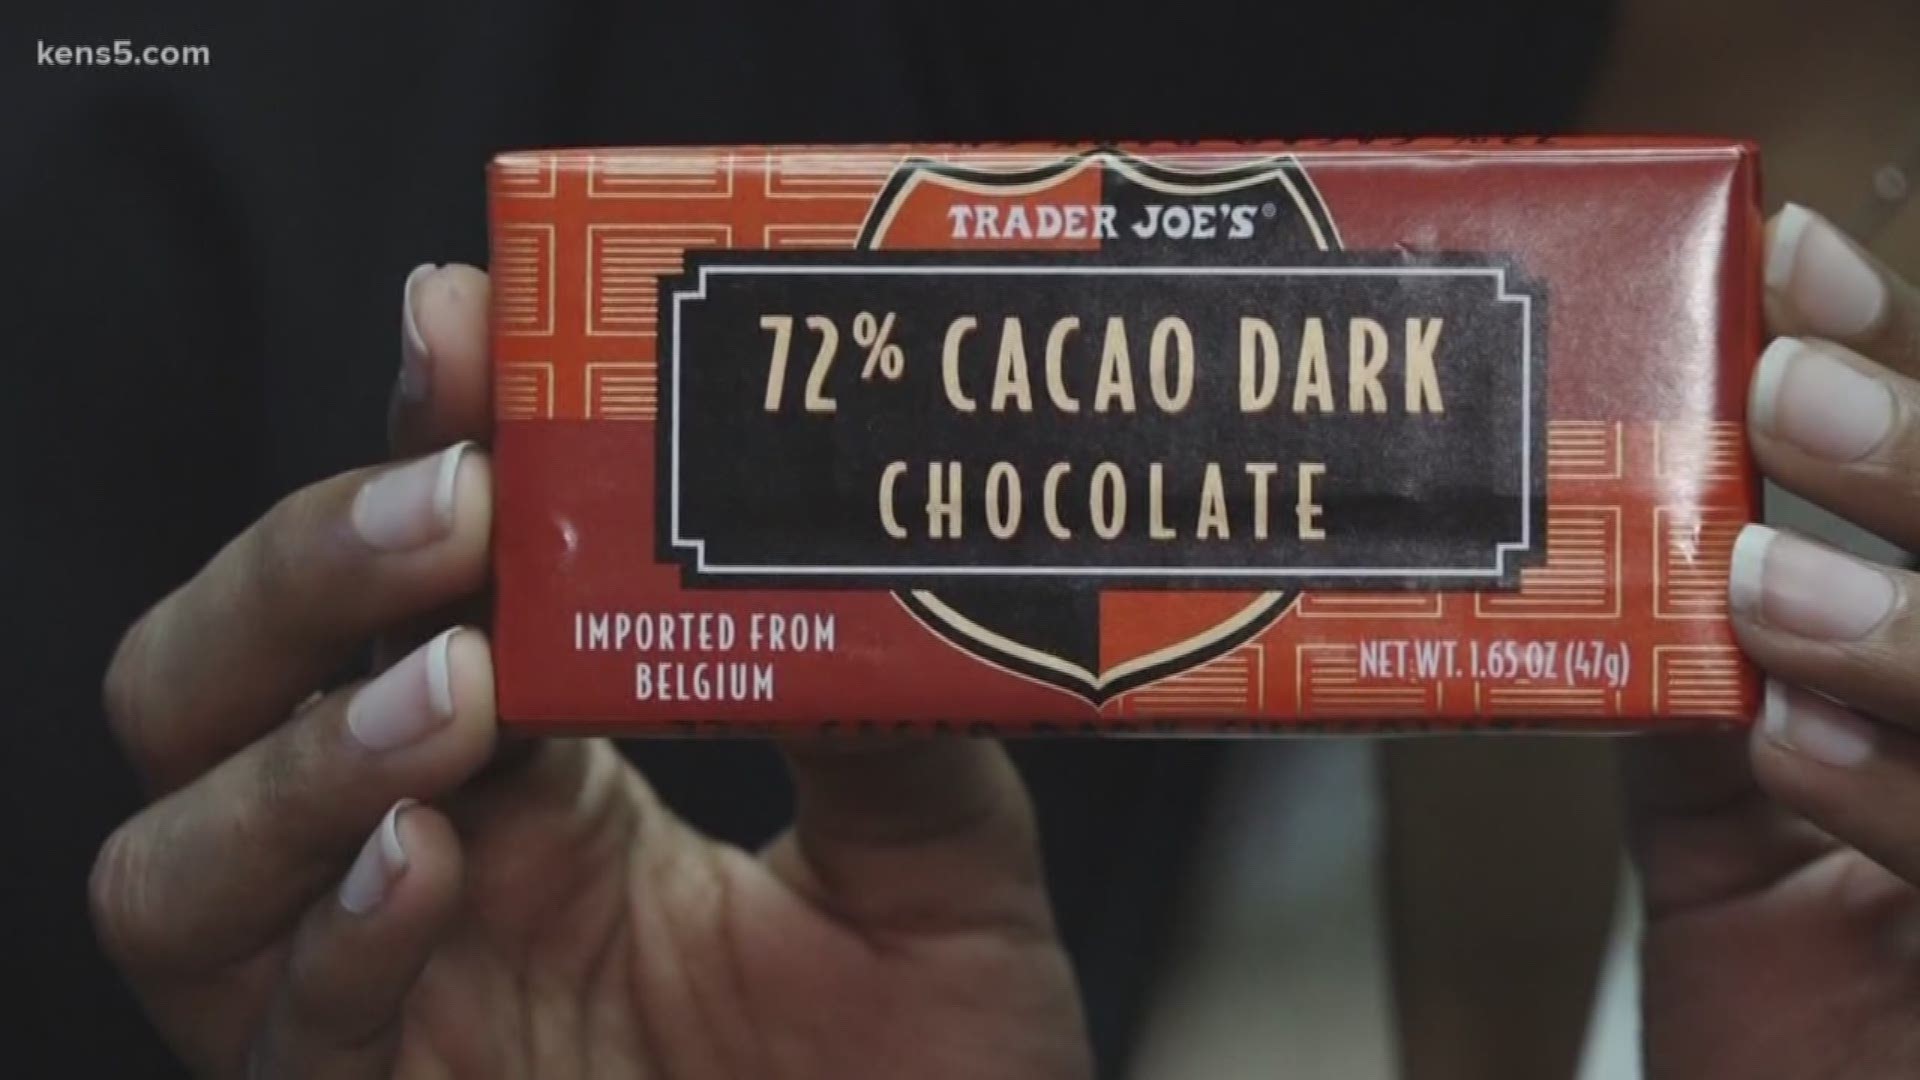 A study conducted at San Antonio's University of the Incarnate Word found that dark chocolate, right after eating it, could make your vision better.